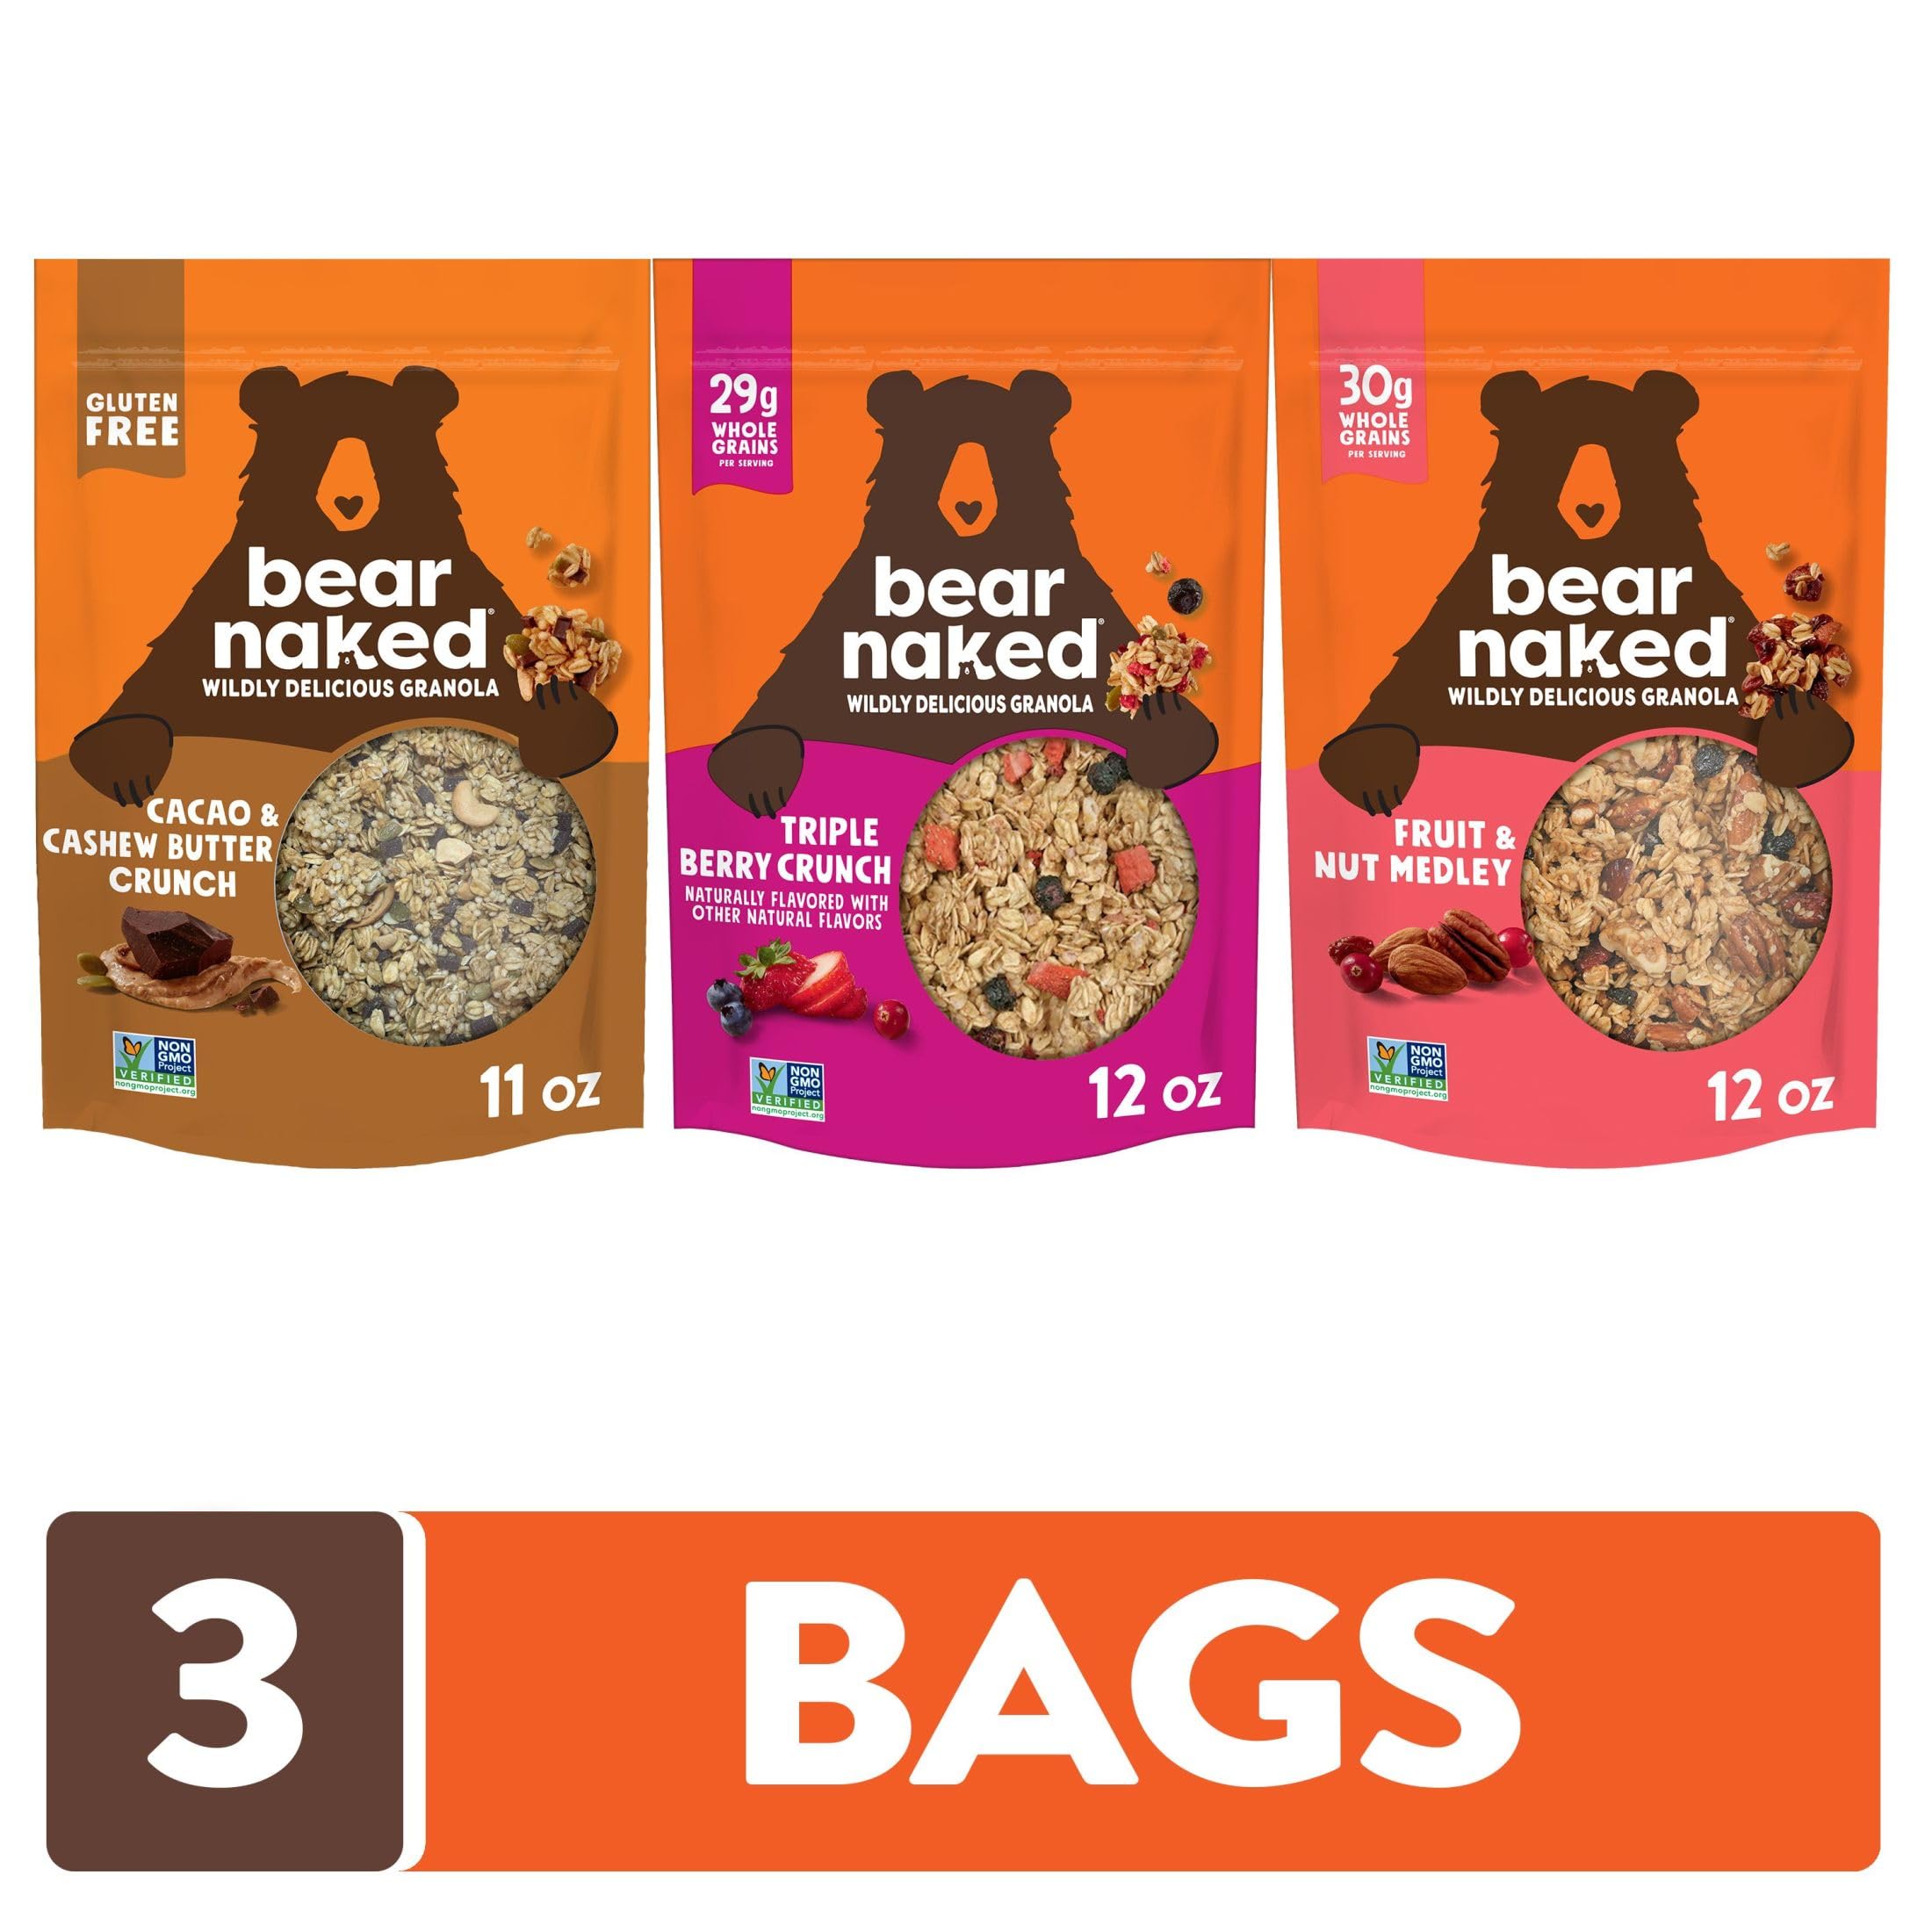 3-Pack 12-Oz Bear Naked Wildly Delicious Granola (Variety Pack) $8.85 ($2.95 each) w/ S&S + Free Shipping w/ Prime or on $35+